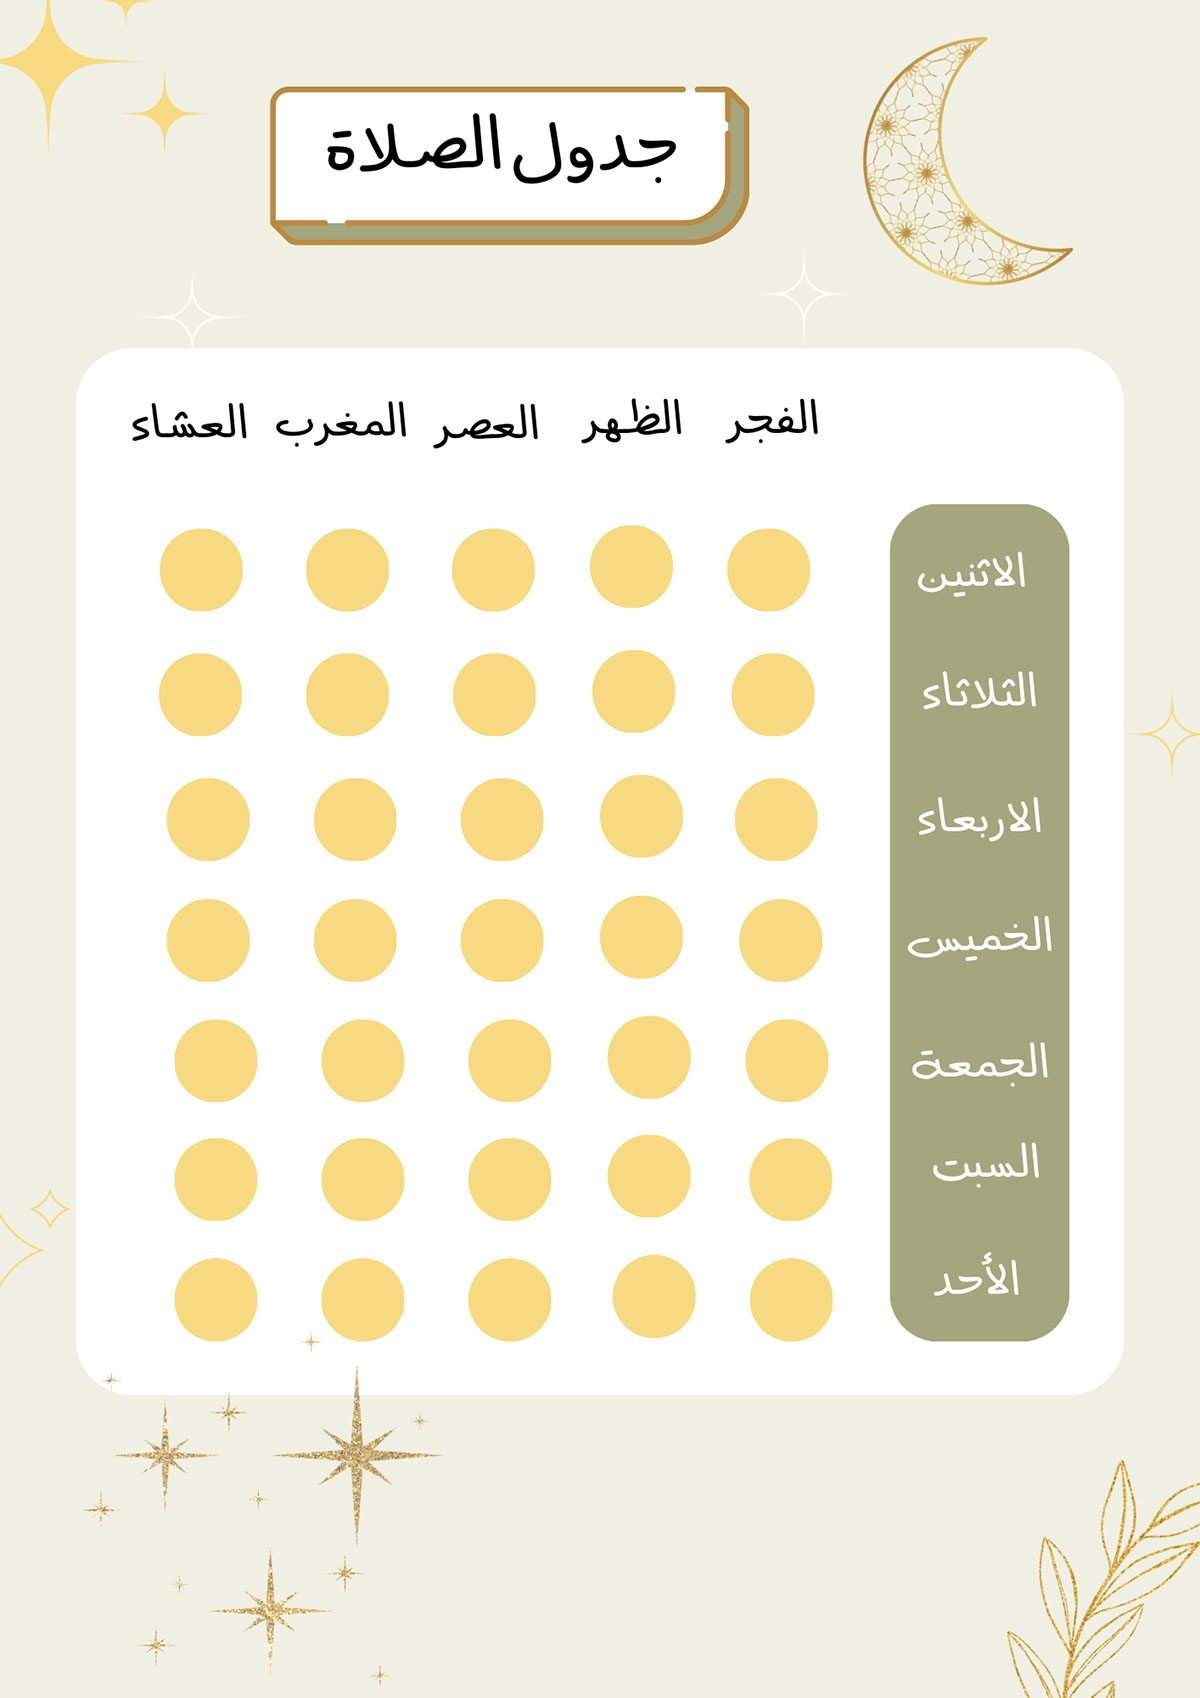 Daily prayer tracker rendition image